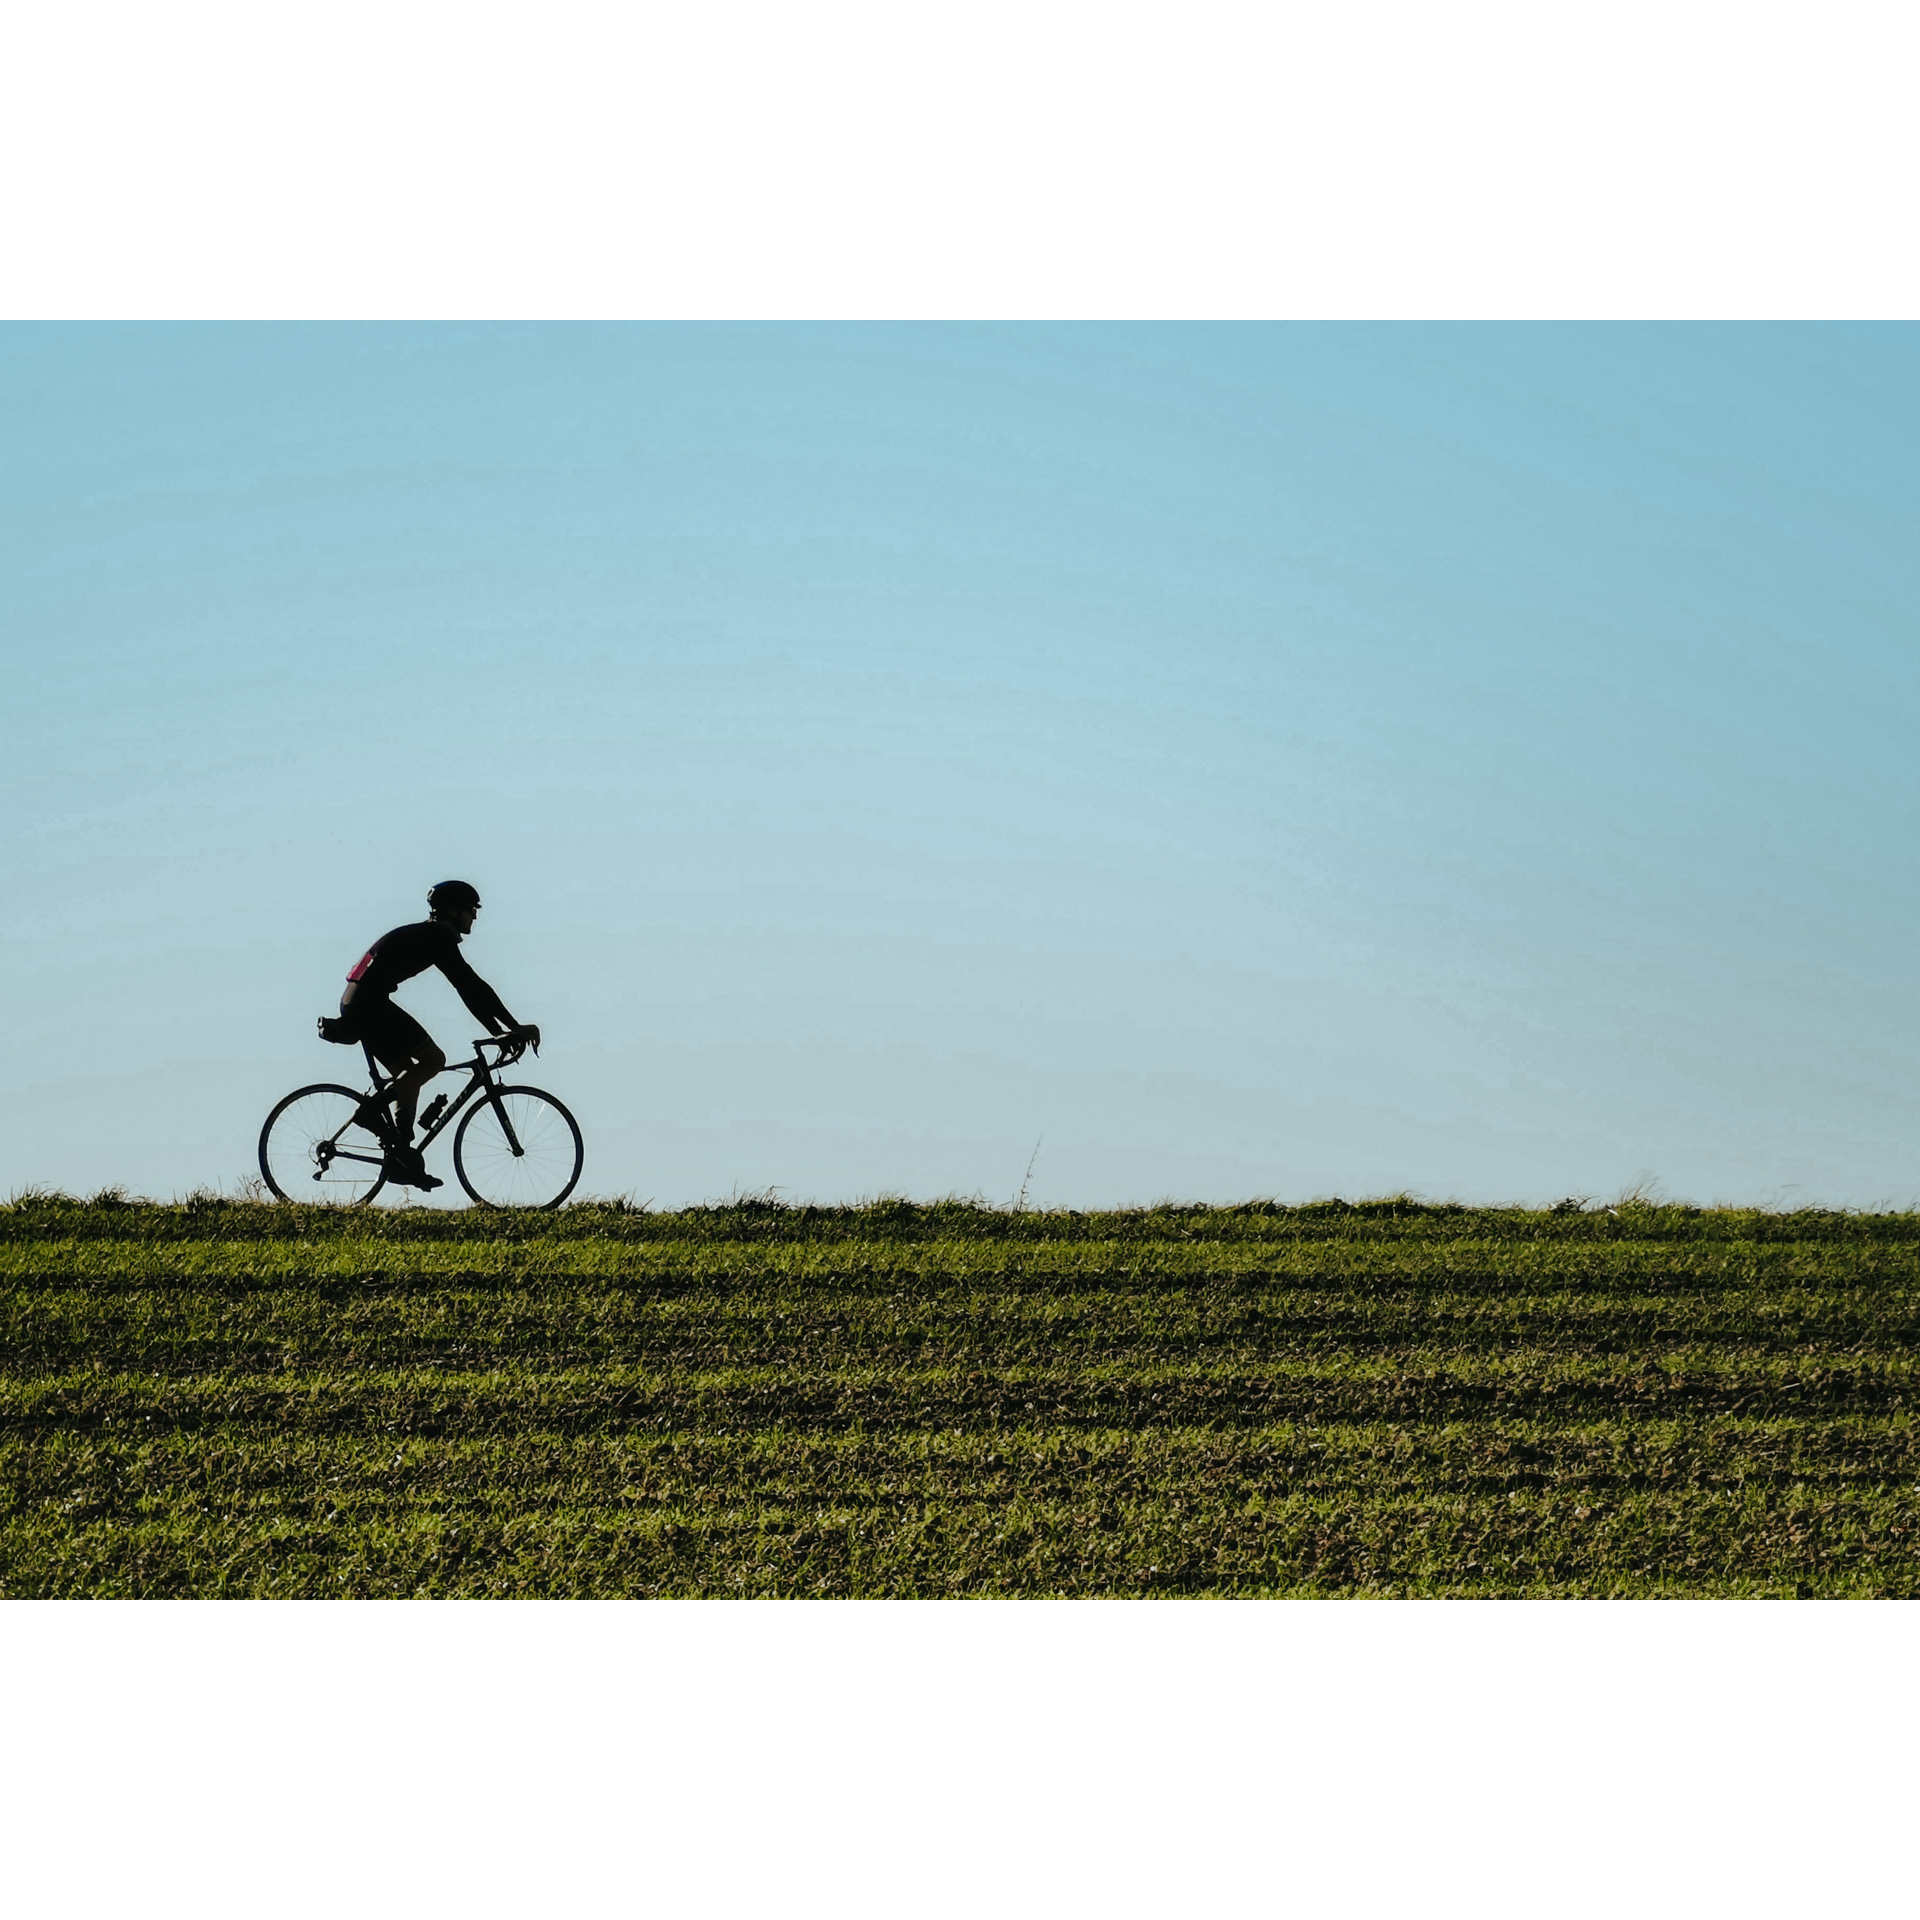 A cyclist in cycling clothes and a helmet riding along a green farmland against a blue sky